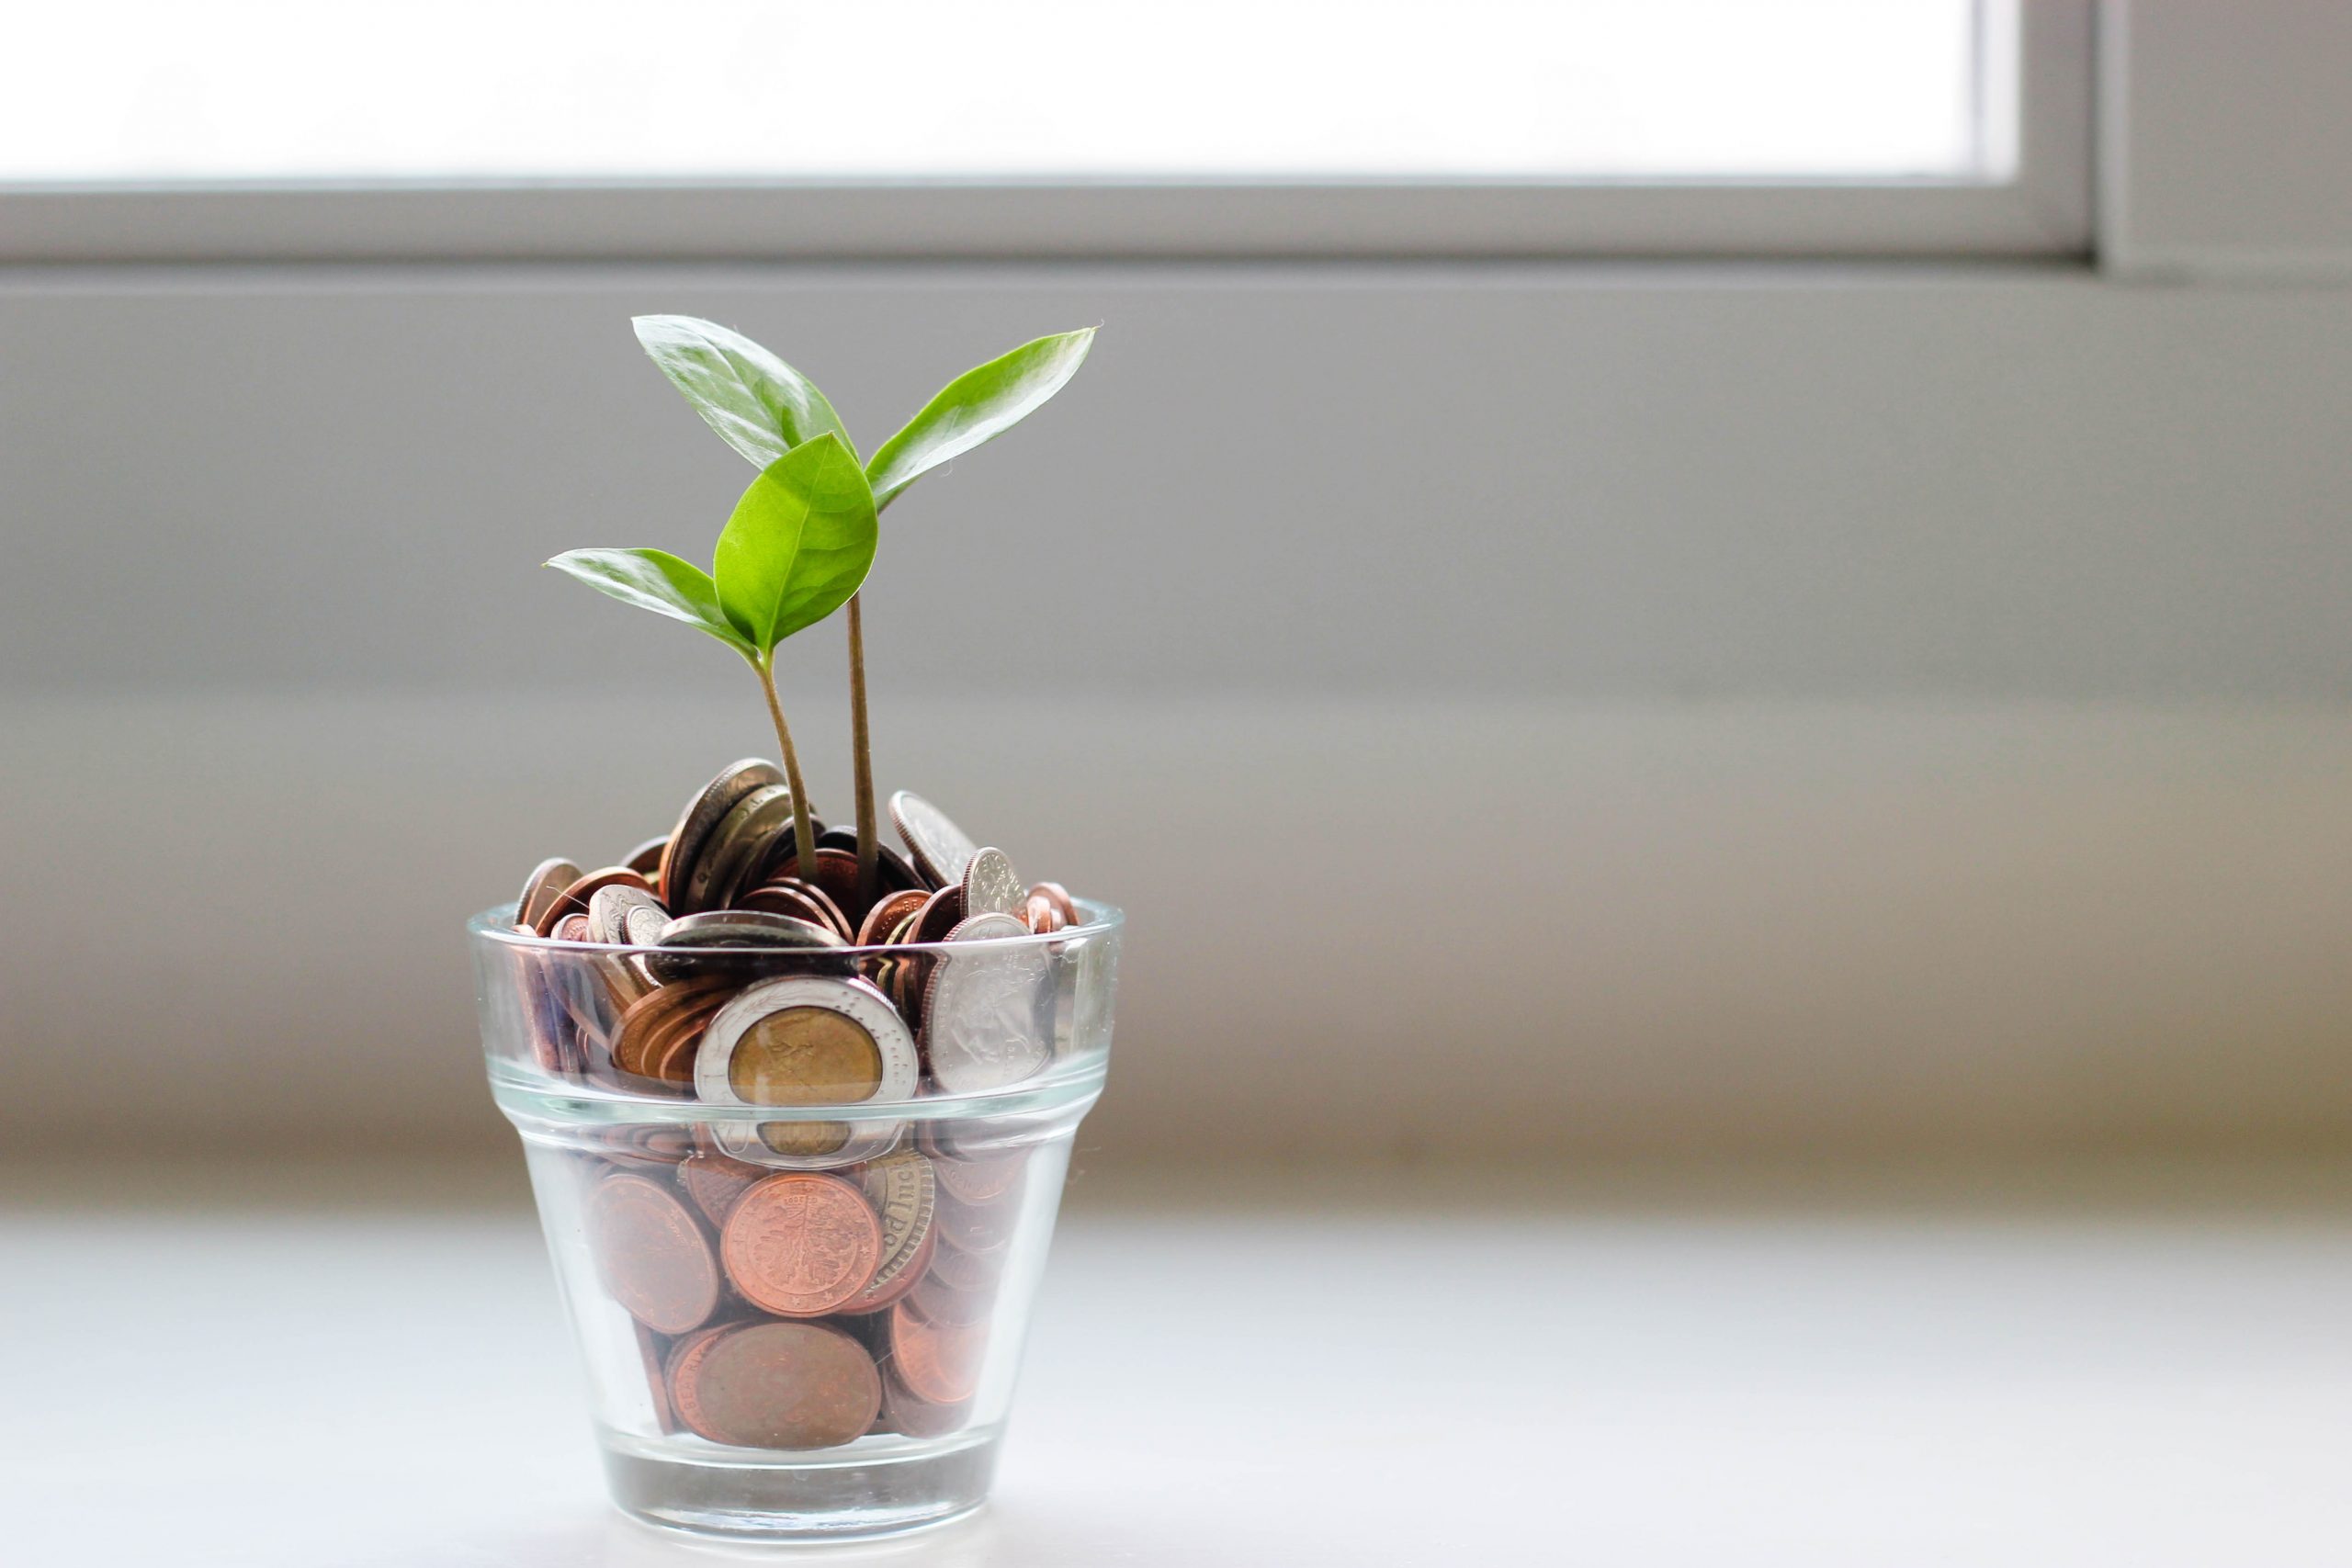 A plant growing out of a coin jar